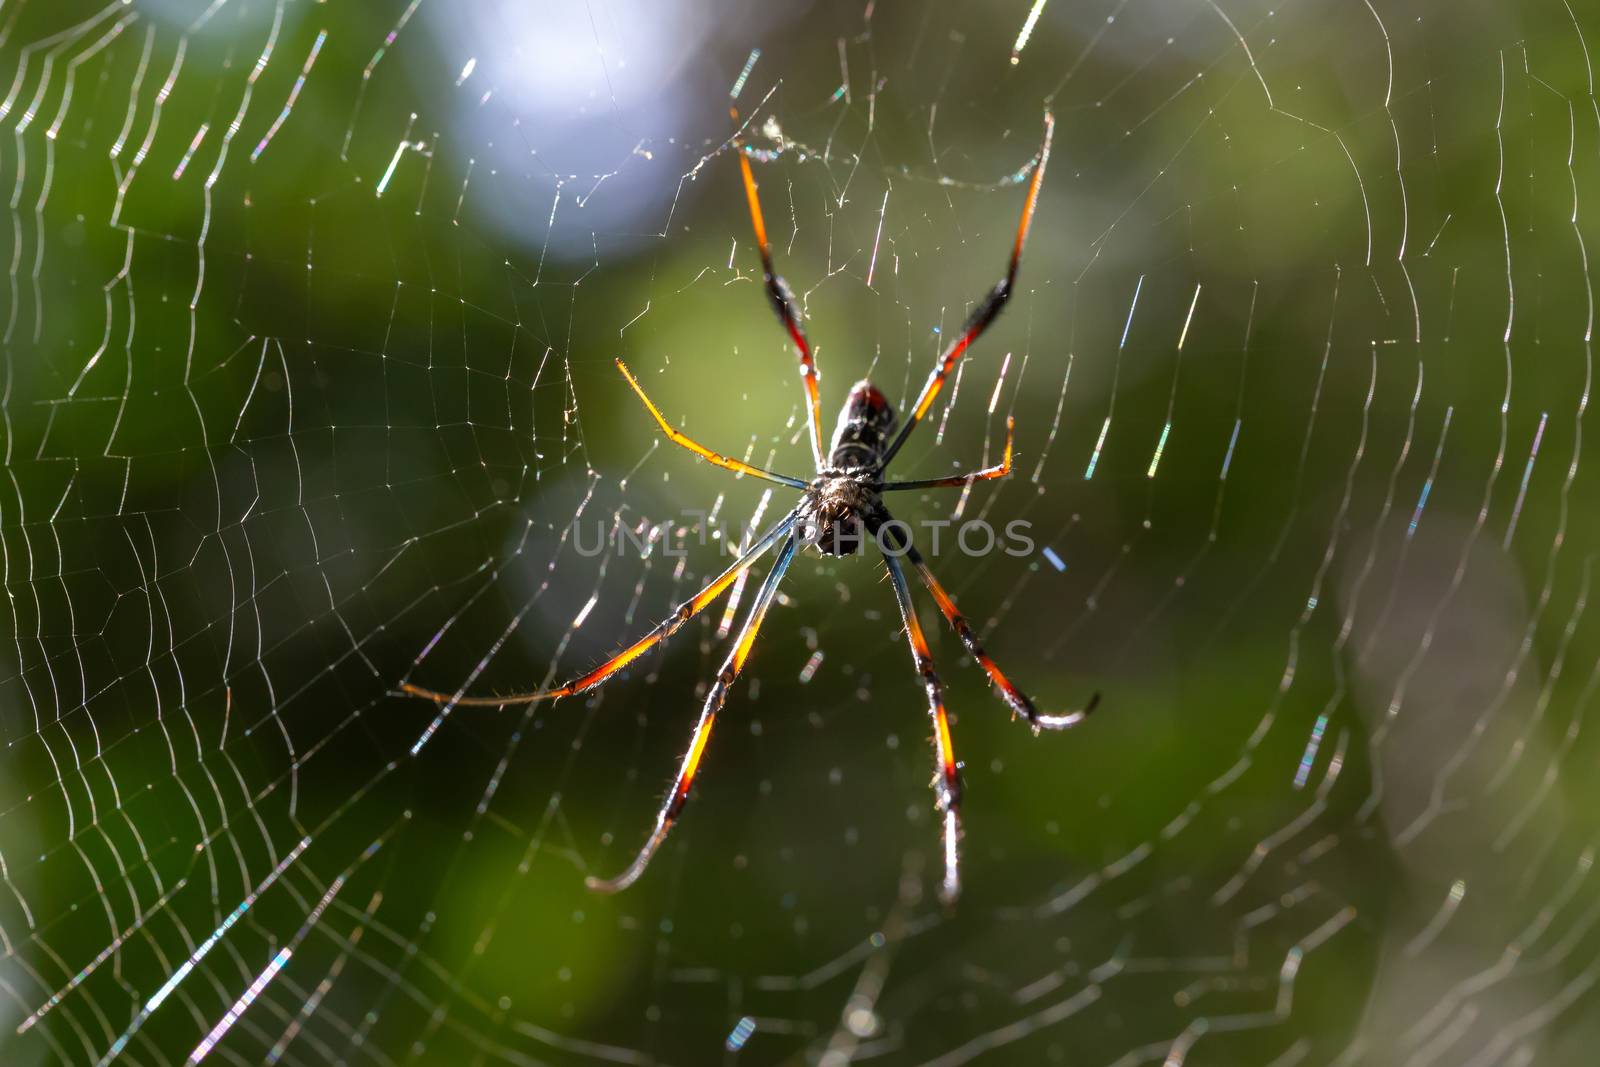 A web with a spider, with a blurry green background